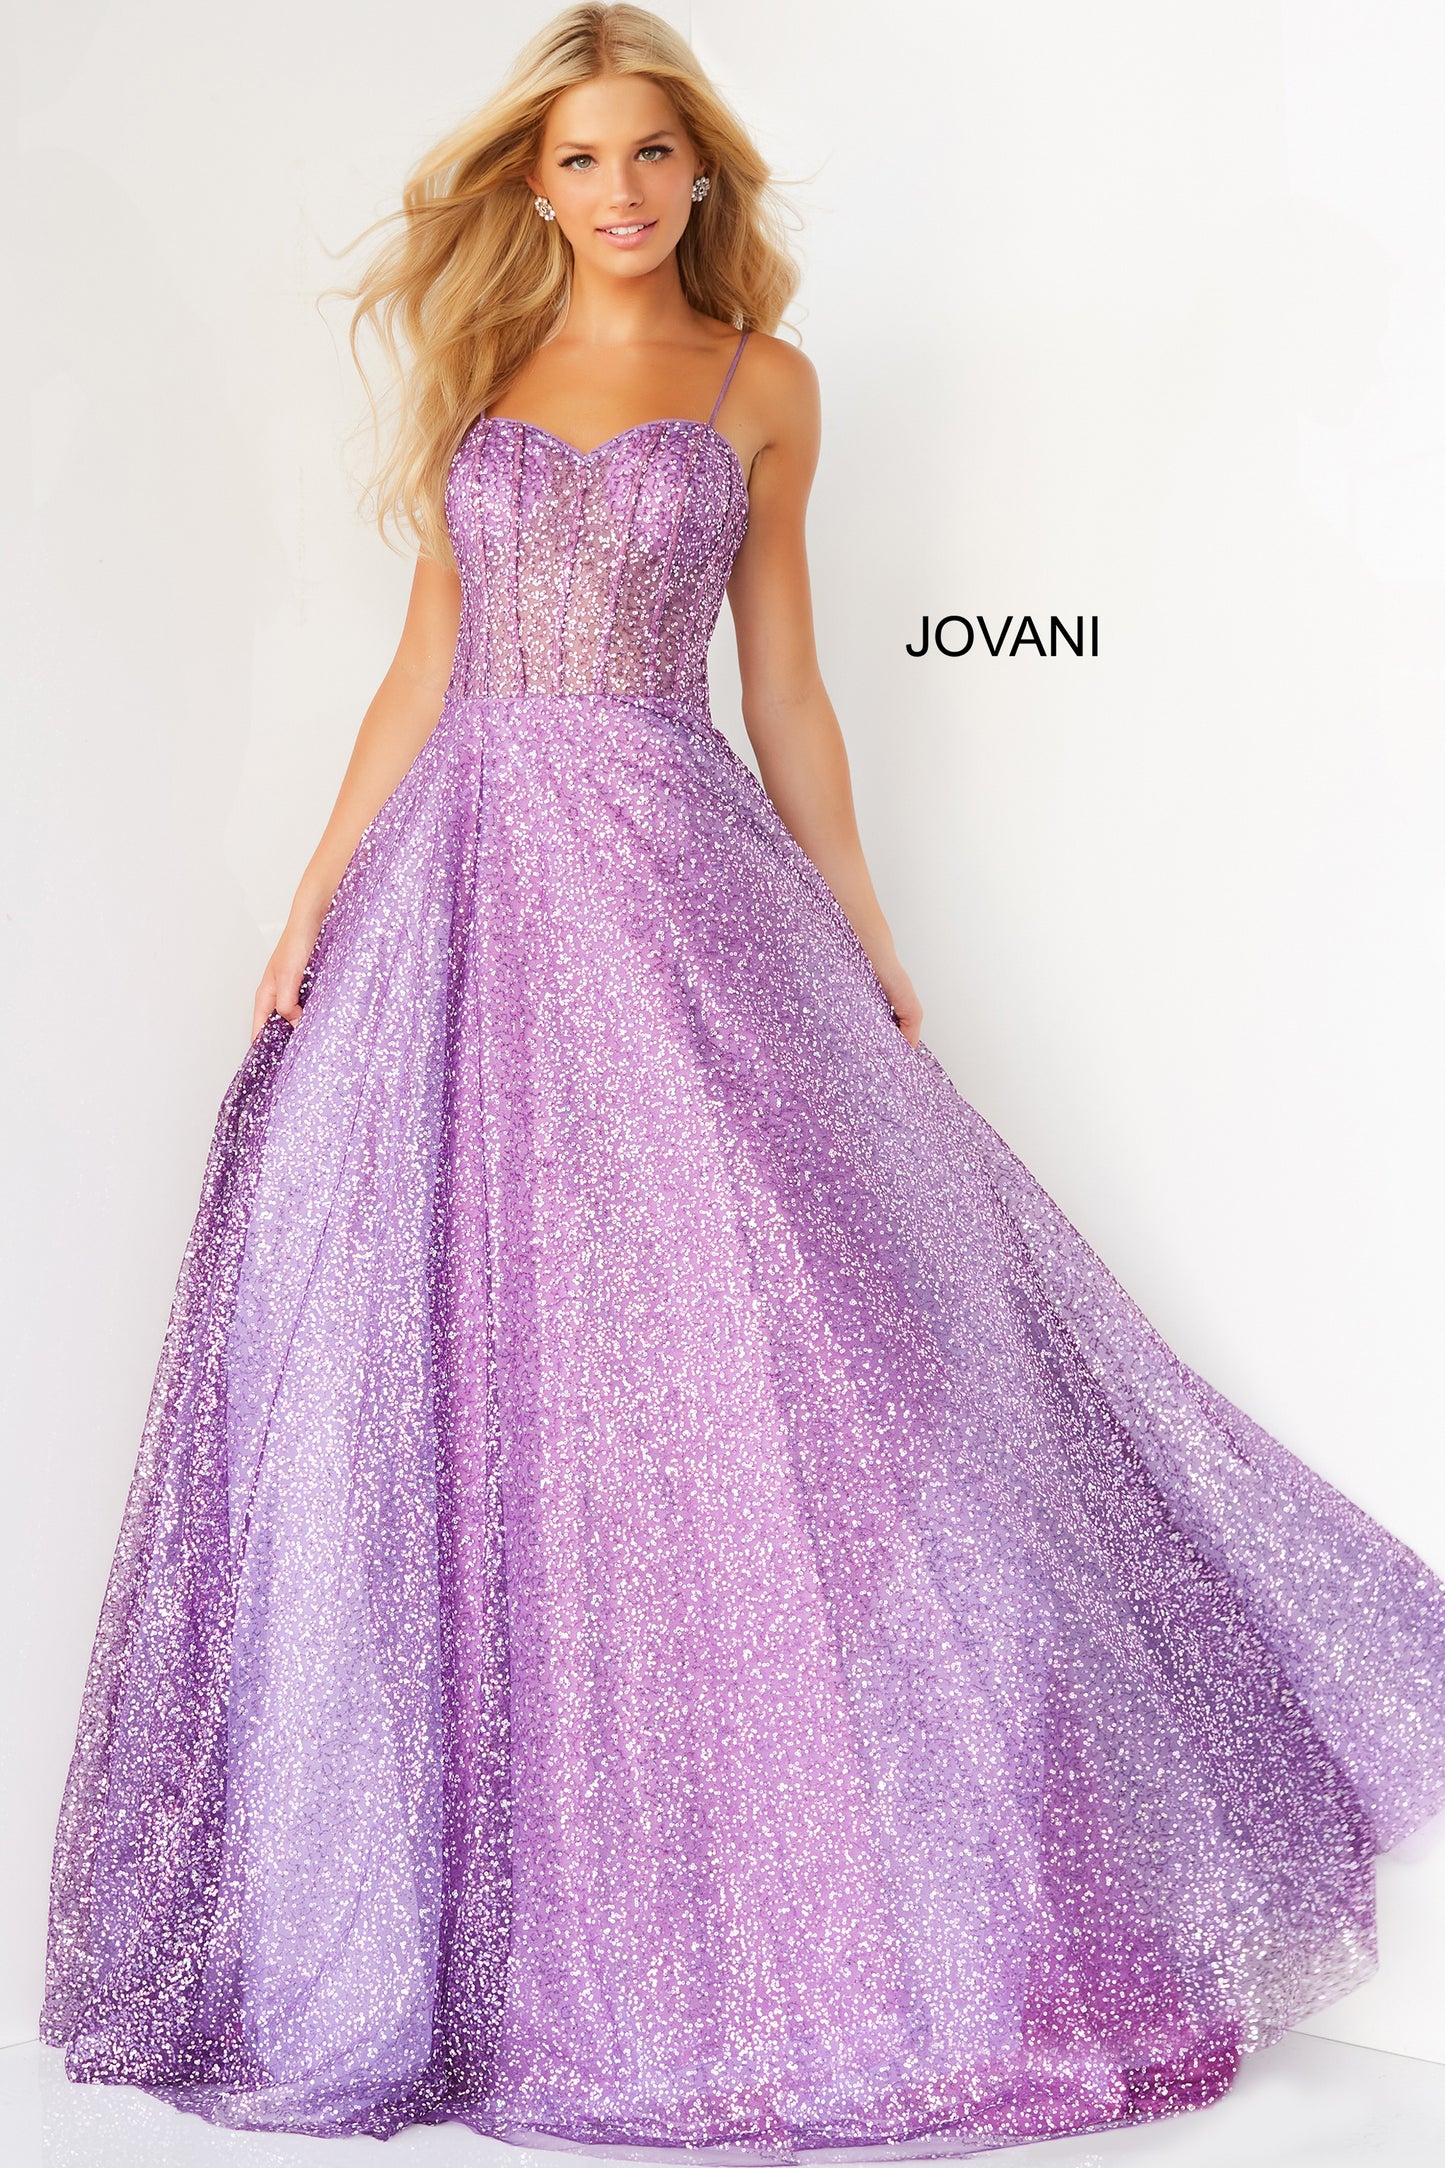 Jovani 07423 Long Ballgown Prom Pageant Gown.  This Jovani purple prom ballgown is styled in sequin net, featuring a sheer corset bodice with a sweetheart neckline, spaghetti straps.